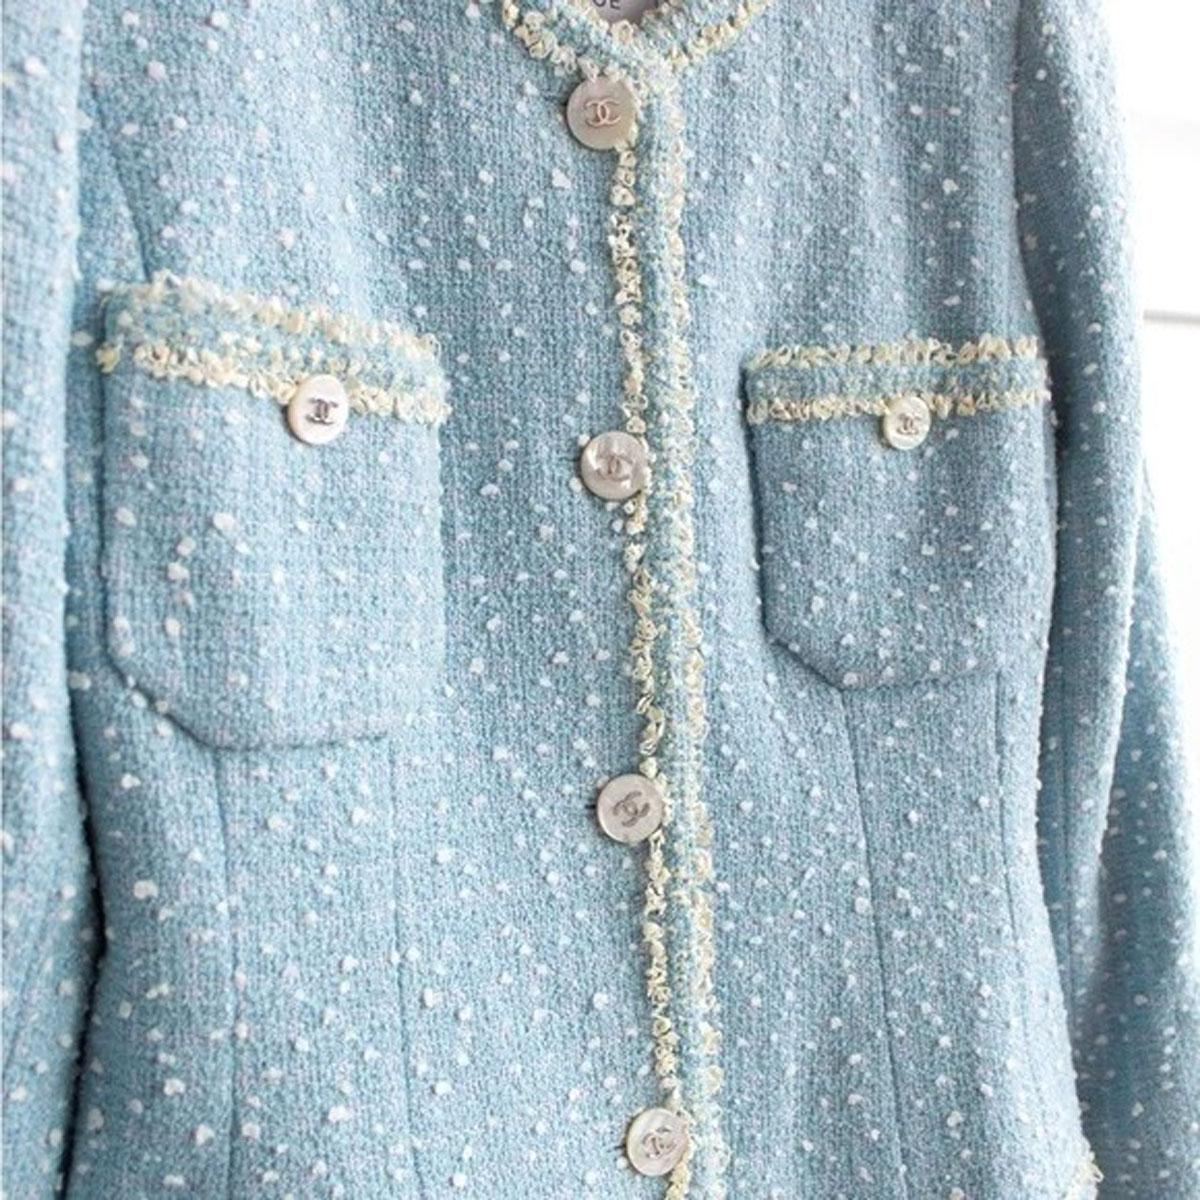 Chanel 1997 Vintage Baby Blue Tweed Jacket Museum Piece Seen on Princess Diana  For Sale 4